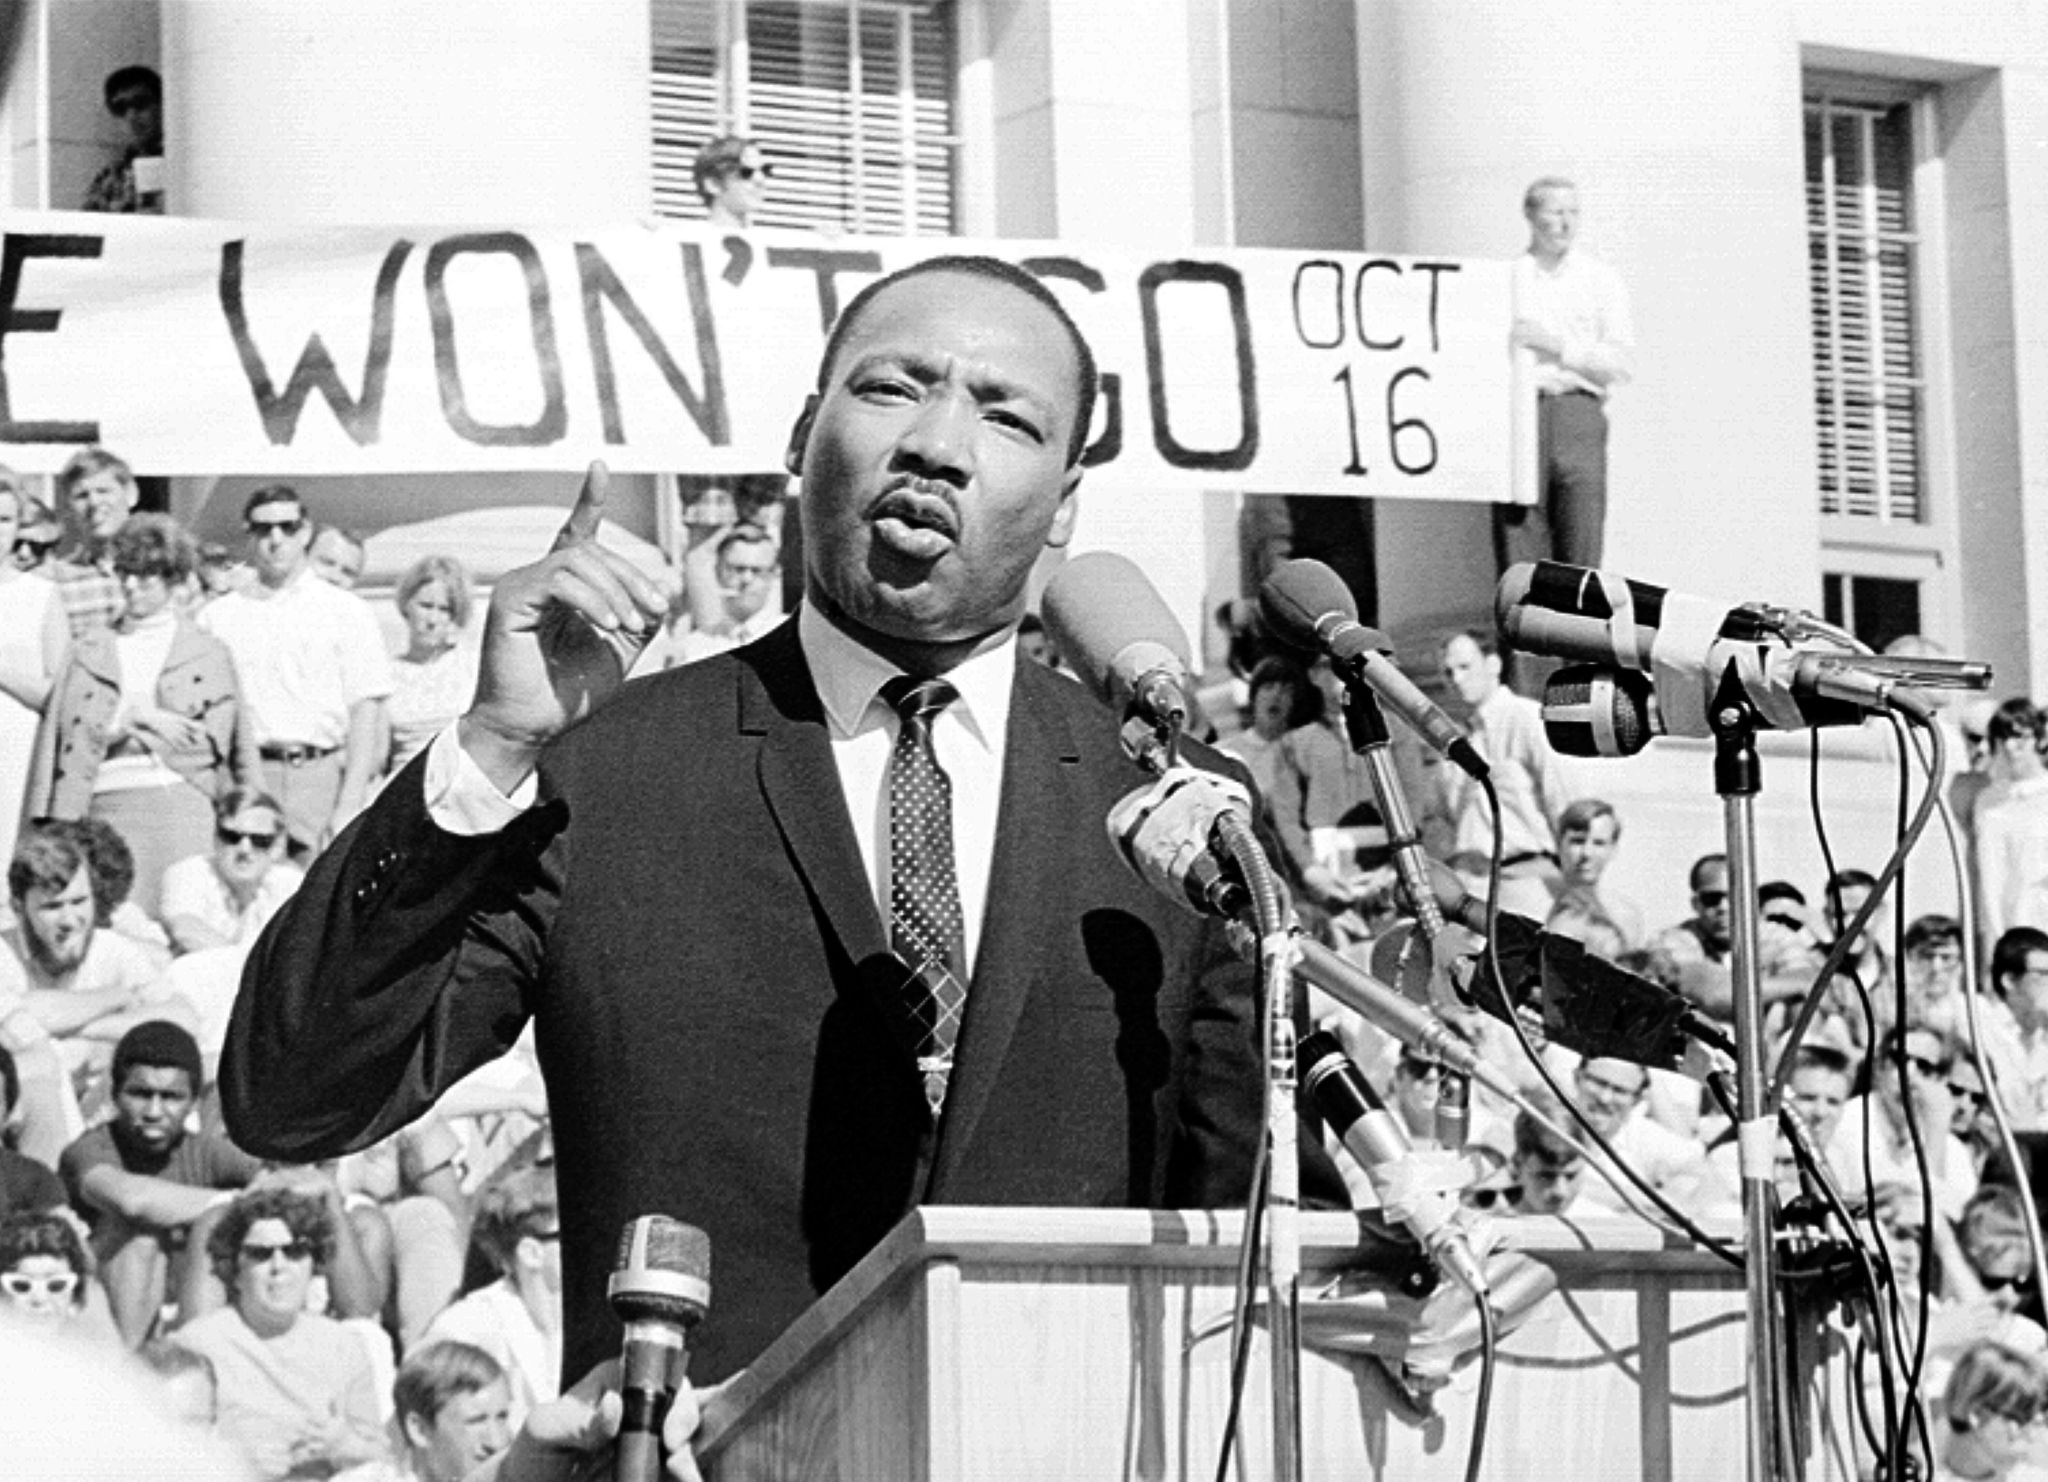 civil rights leader reverend martin luther king, jr delivers a speech to a crowd of approximately 7,000 people on may 17, 1967 at uc berkeleys sproul plaza in berkeley, california photo by michael ochs archivesgetty images